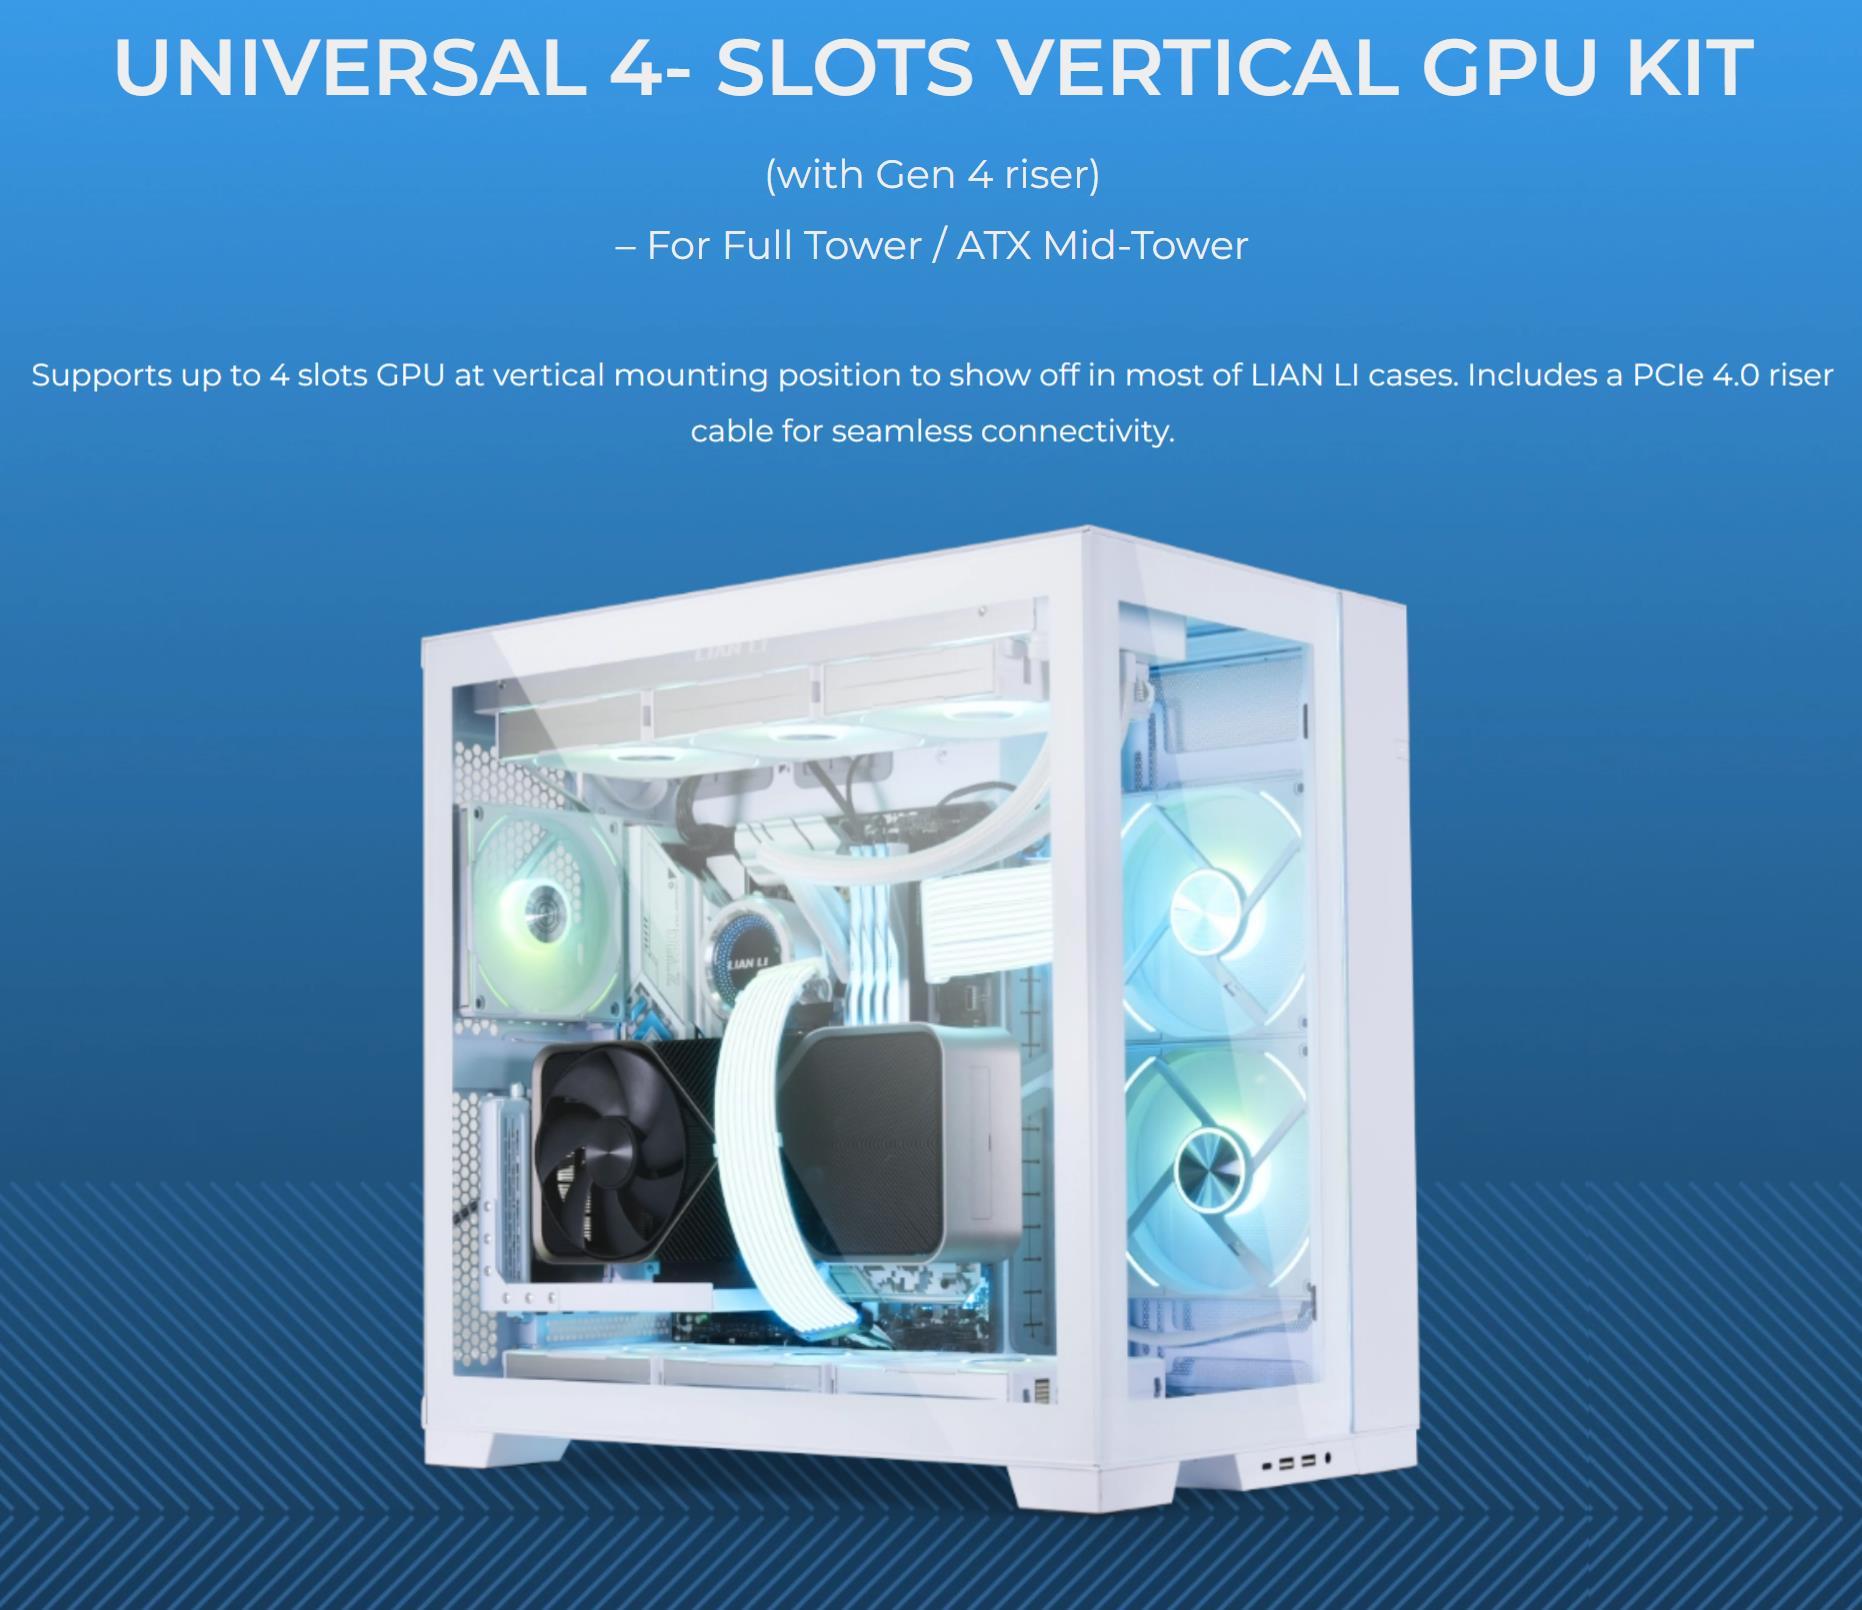 A large marketing image providing additional information about the product Lian Li G89.VG4-4X.00 Universal 4 Slots Vertical GPU Kit with Gen 4 Riser Black - Additional alt info not provided